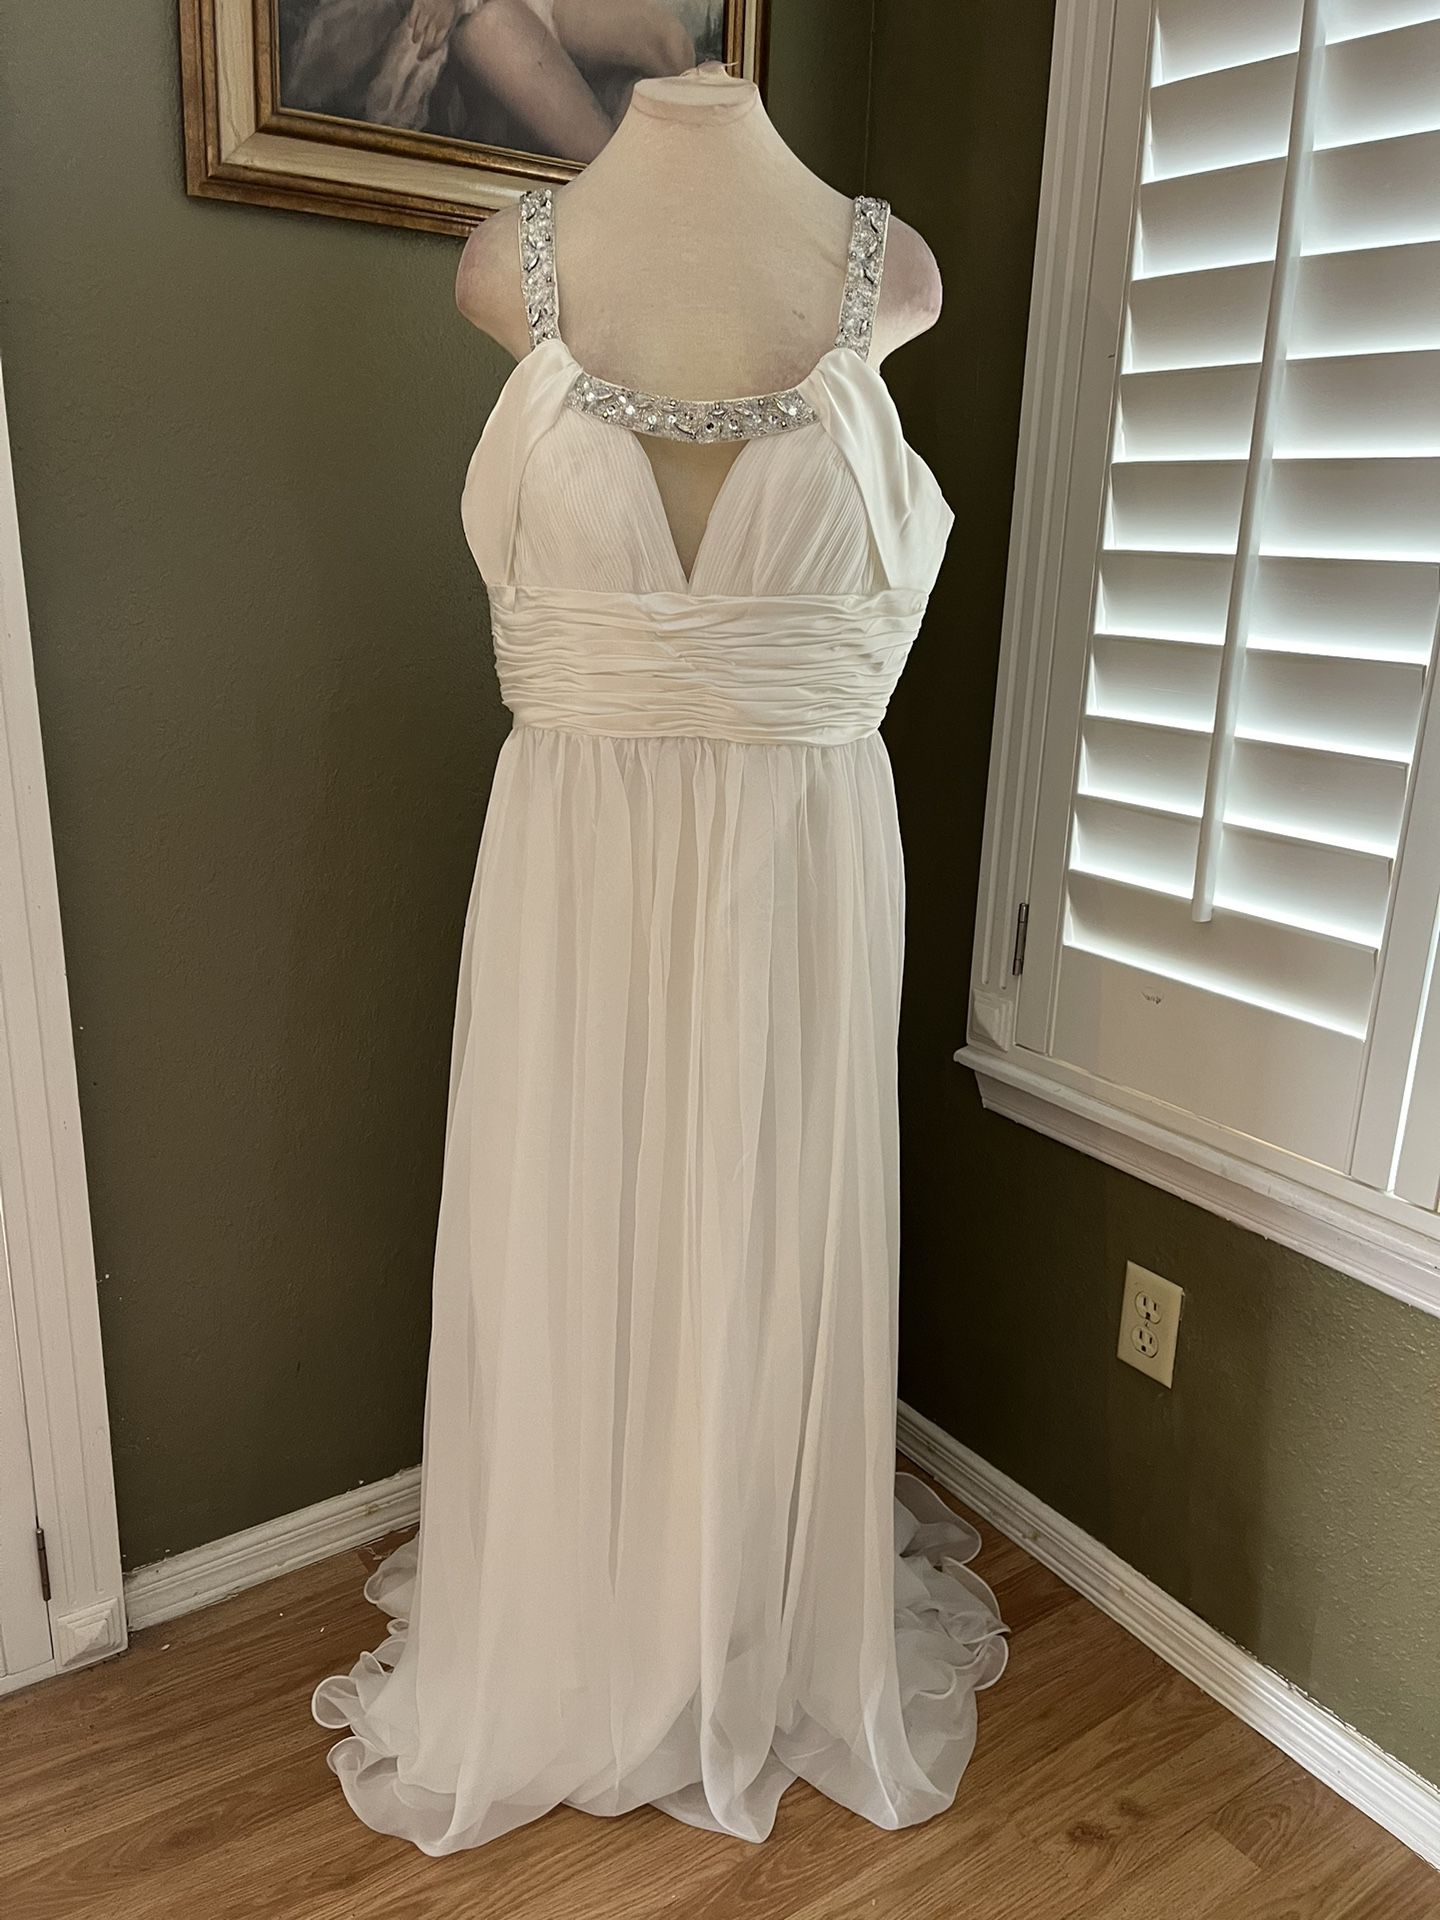 Gown Dress White 